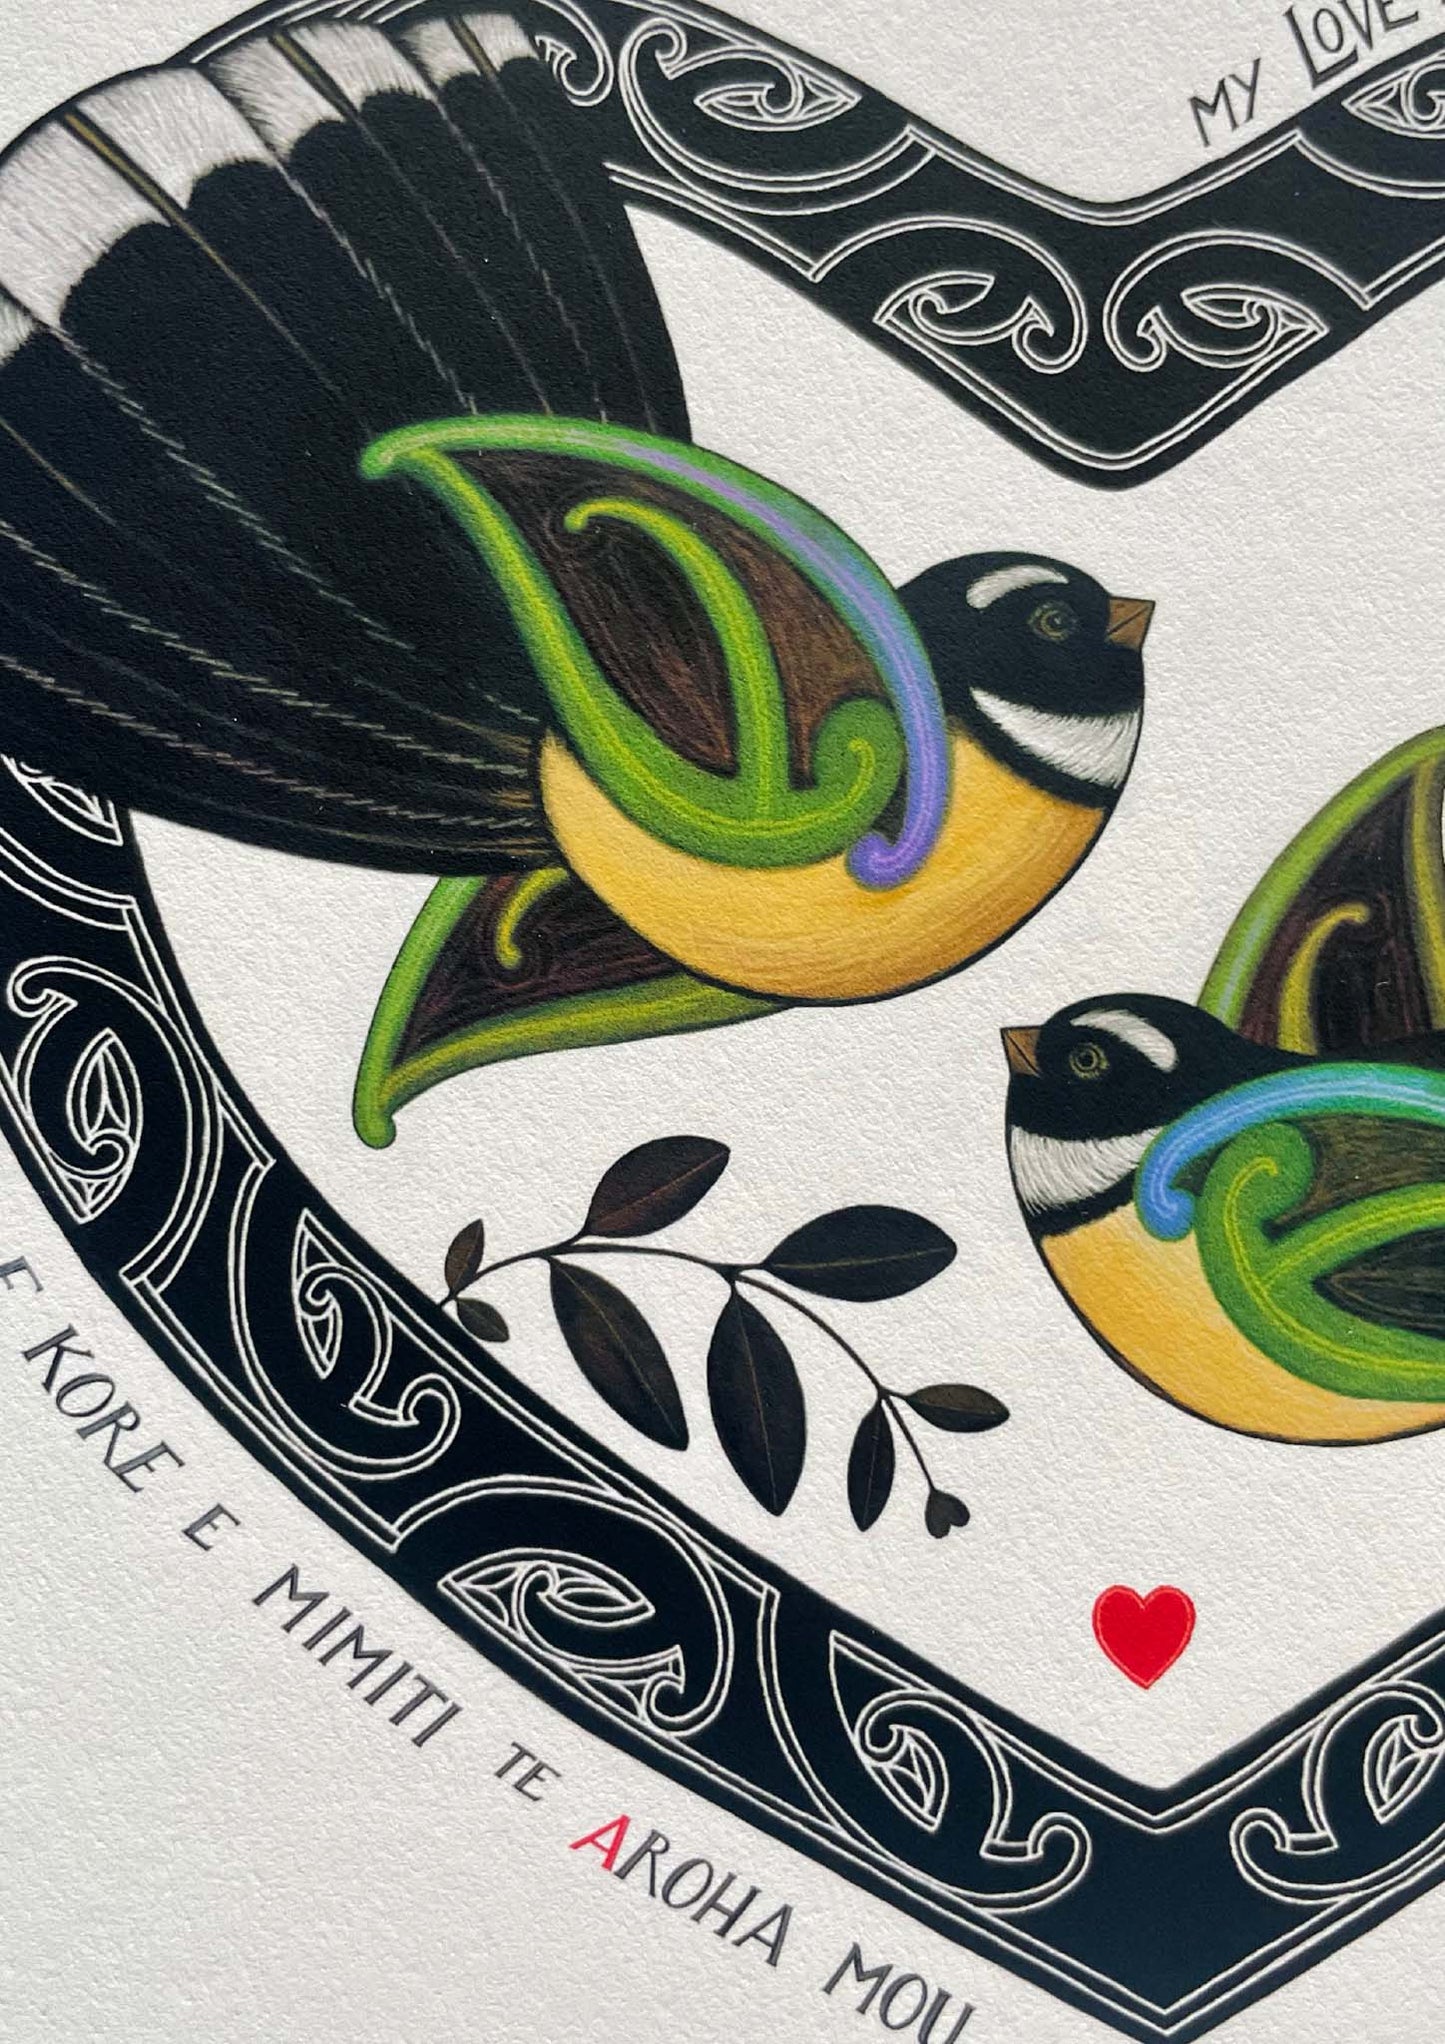 aroha love piwakawaka fantail nz print. My love for you will never fade in te reo maori with english translation. Two fantails in a heart with maori art design.wall art by amber smith